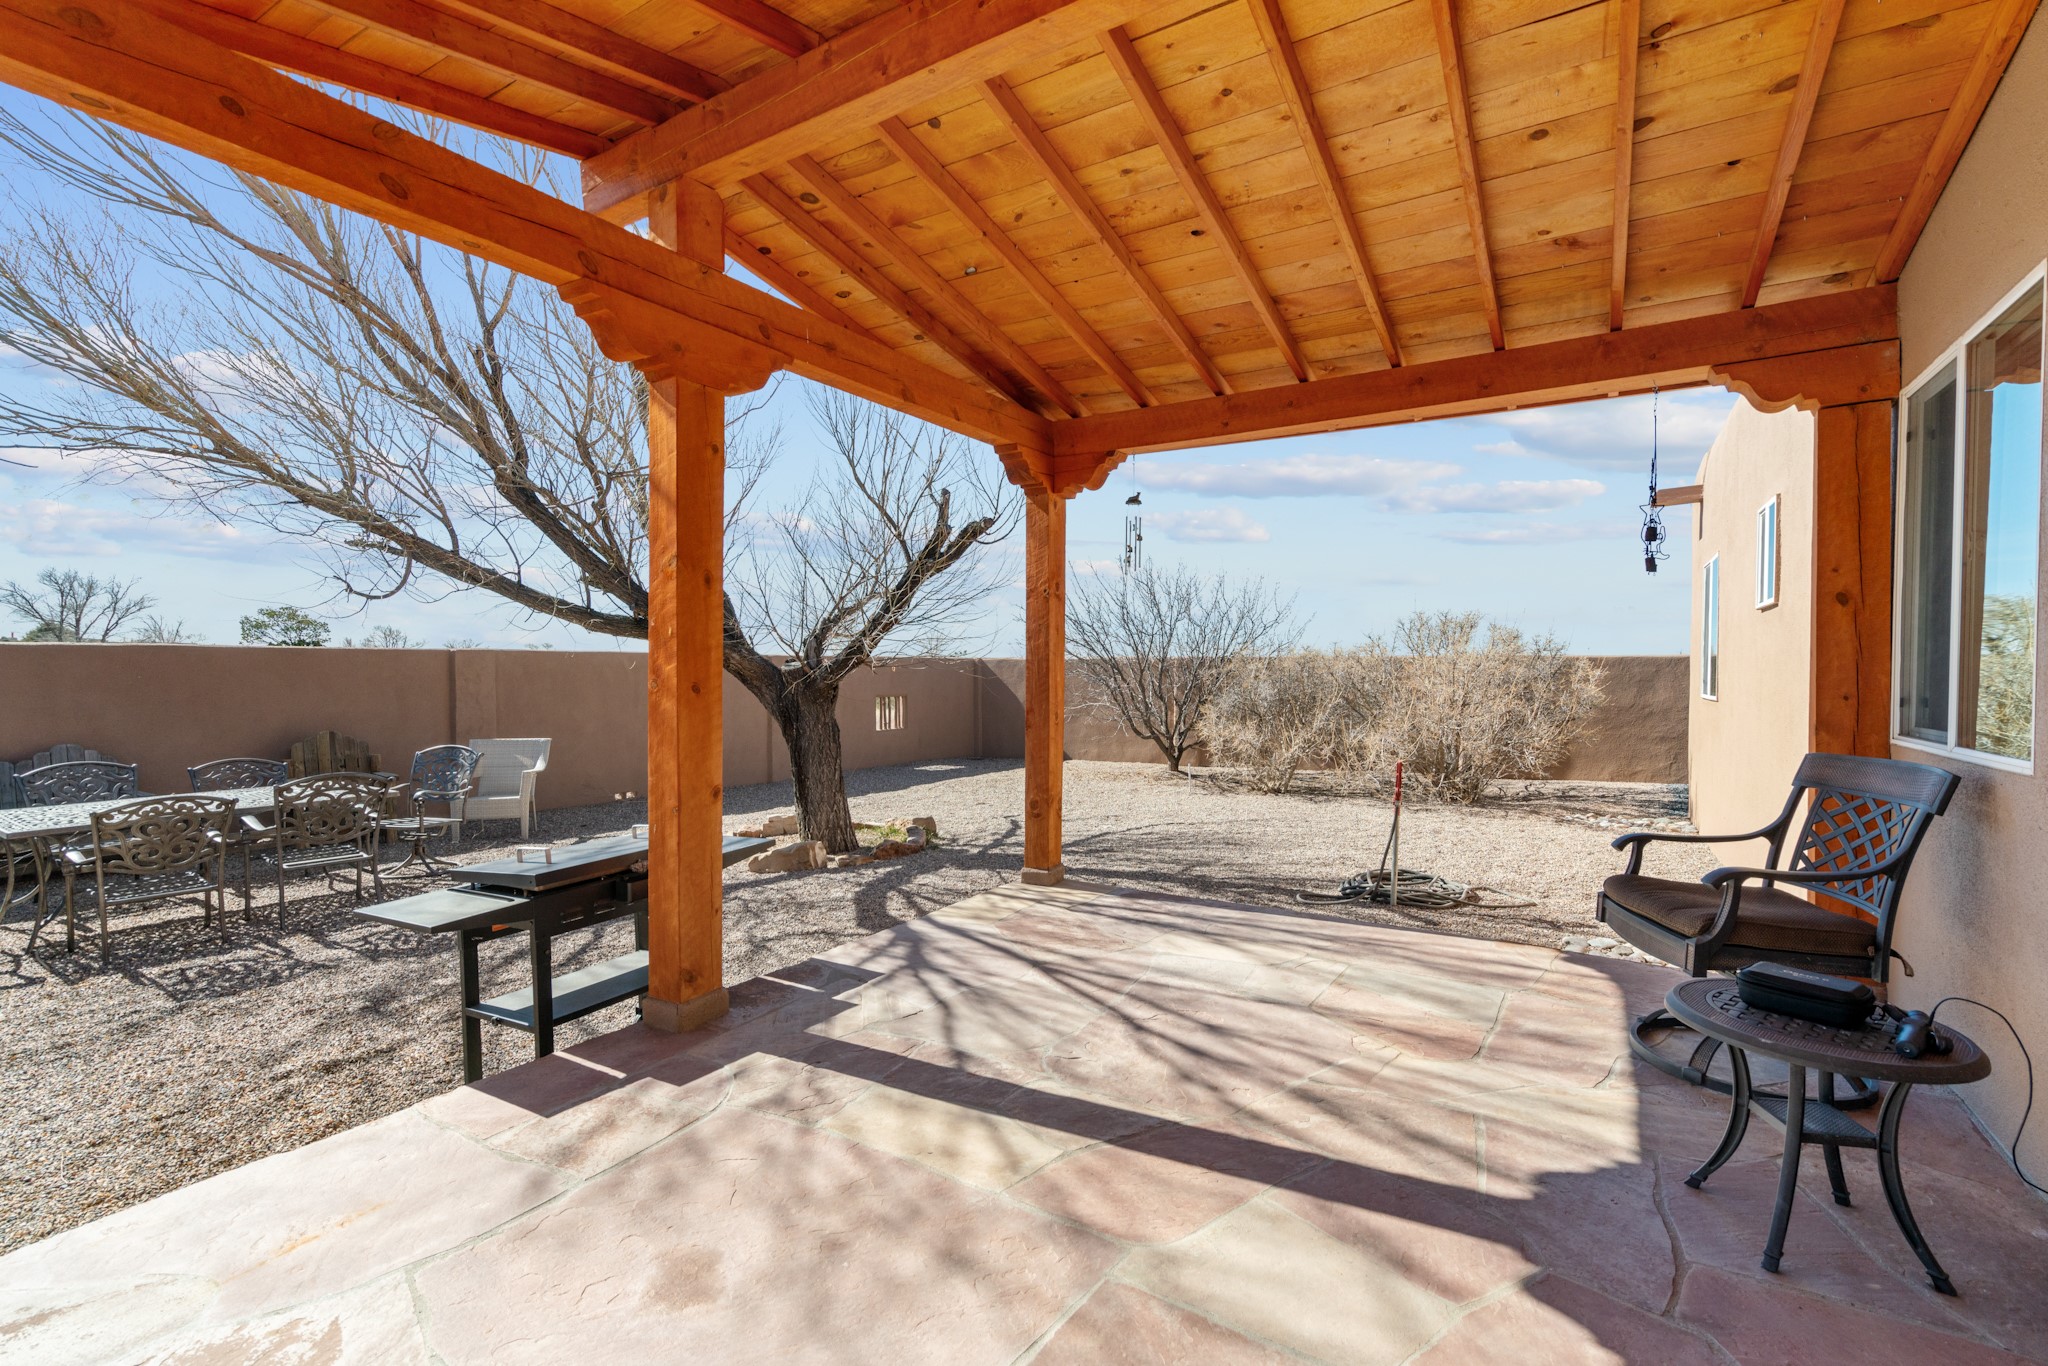 4 S Chamisa Drive, Santa Fe, New Mexico 87508, 3 Bedrooms Bedrooms, ,2 BathroomsBathrooms,Residential,For Sale,4 S Chamisa Drive,202400645